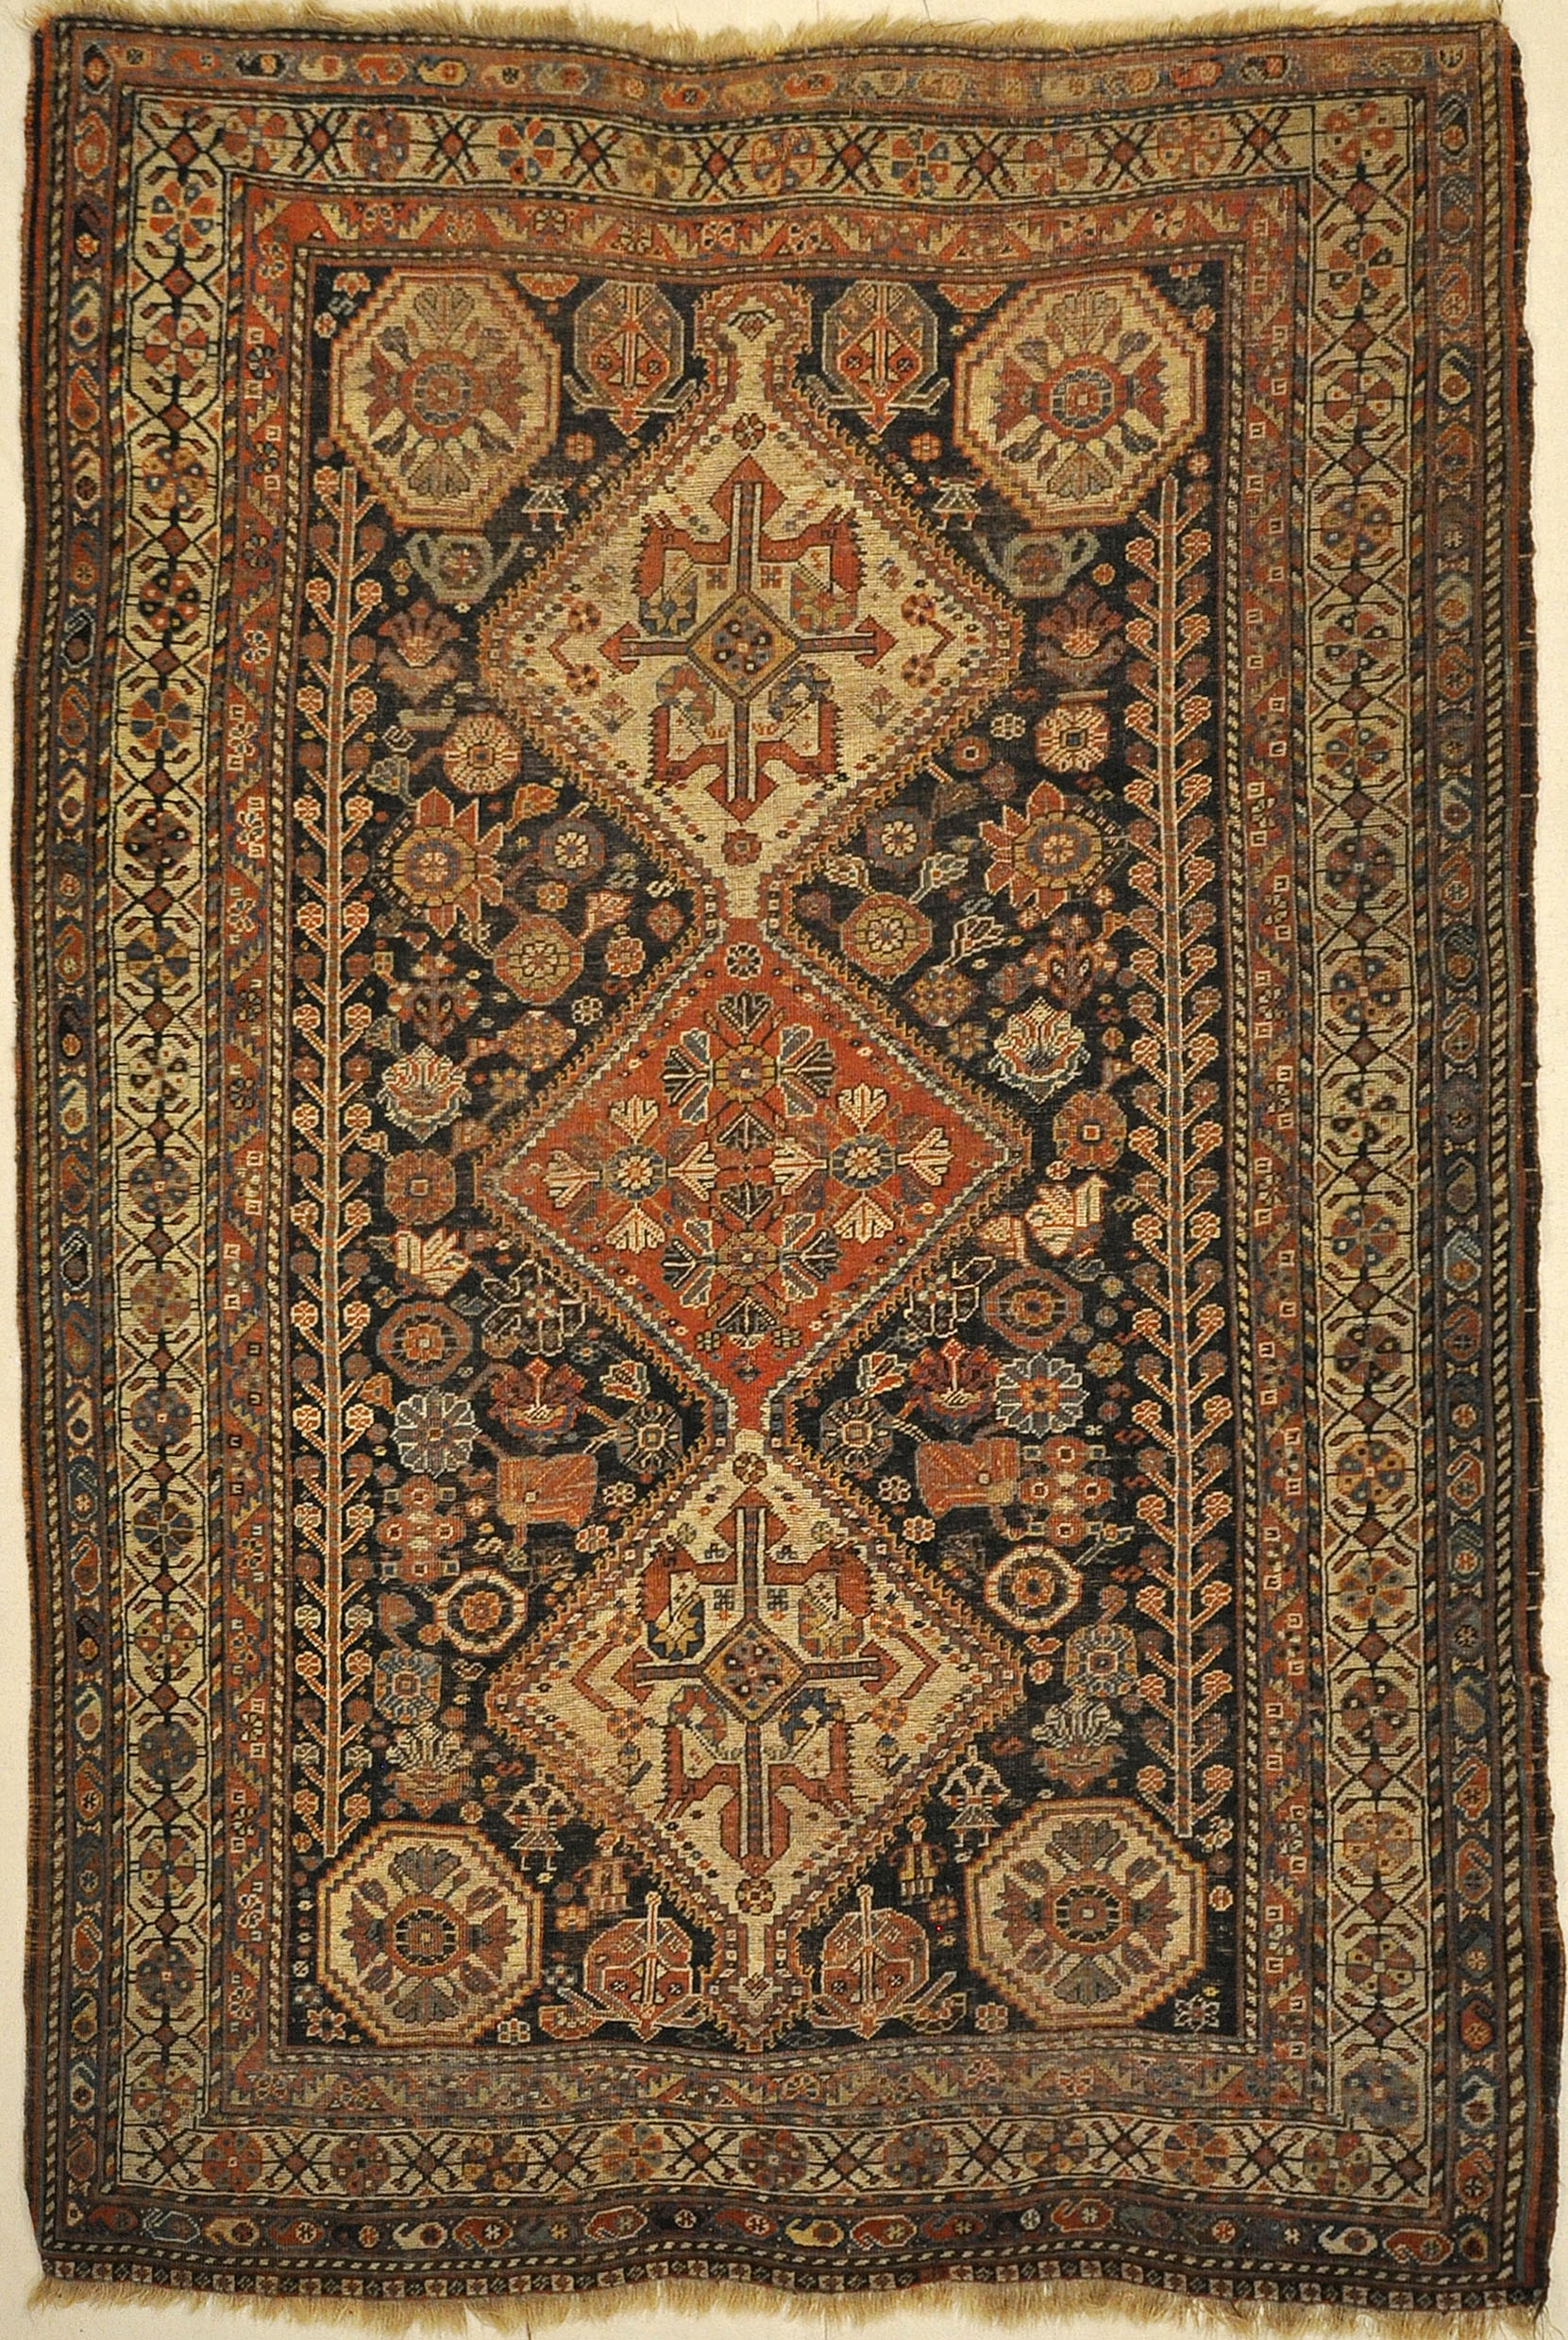 Antique Persian Qashqai featuring Tribal Flowers. A piece of genuine handwoven carpet art sold by Santa Barbara Design Center Rugs and More.